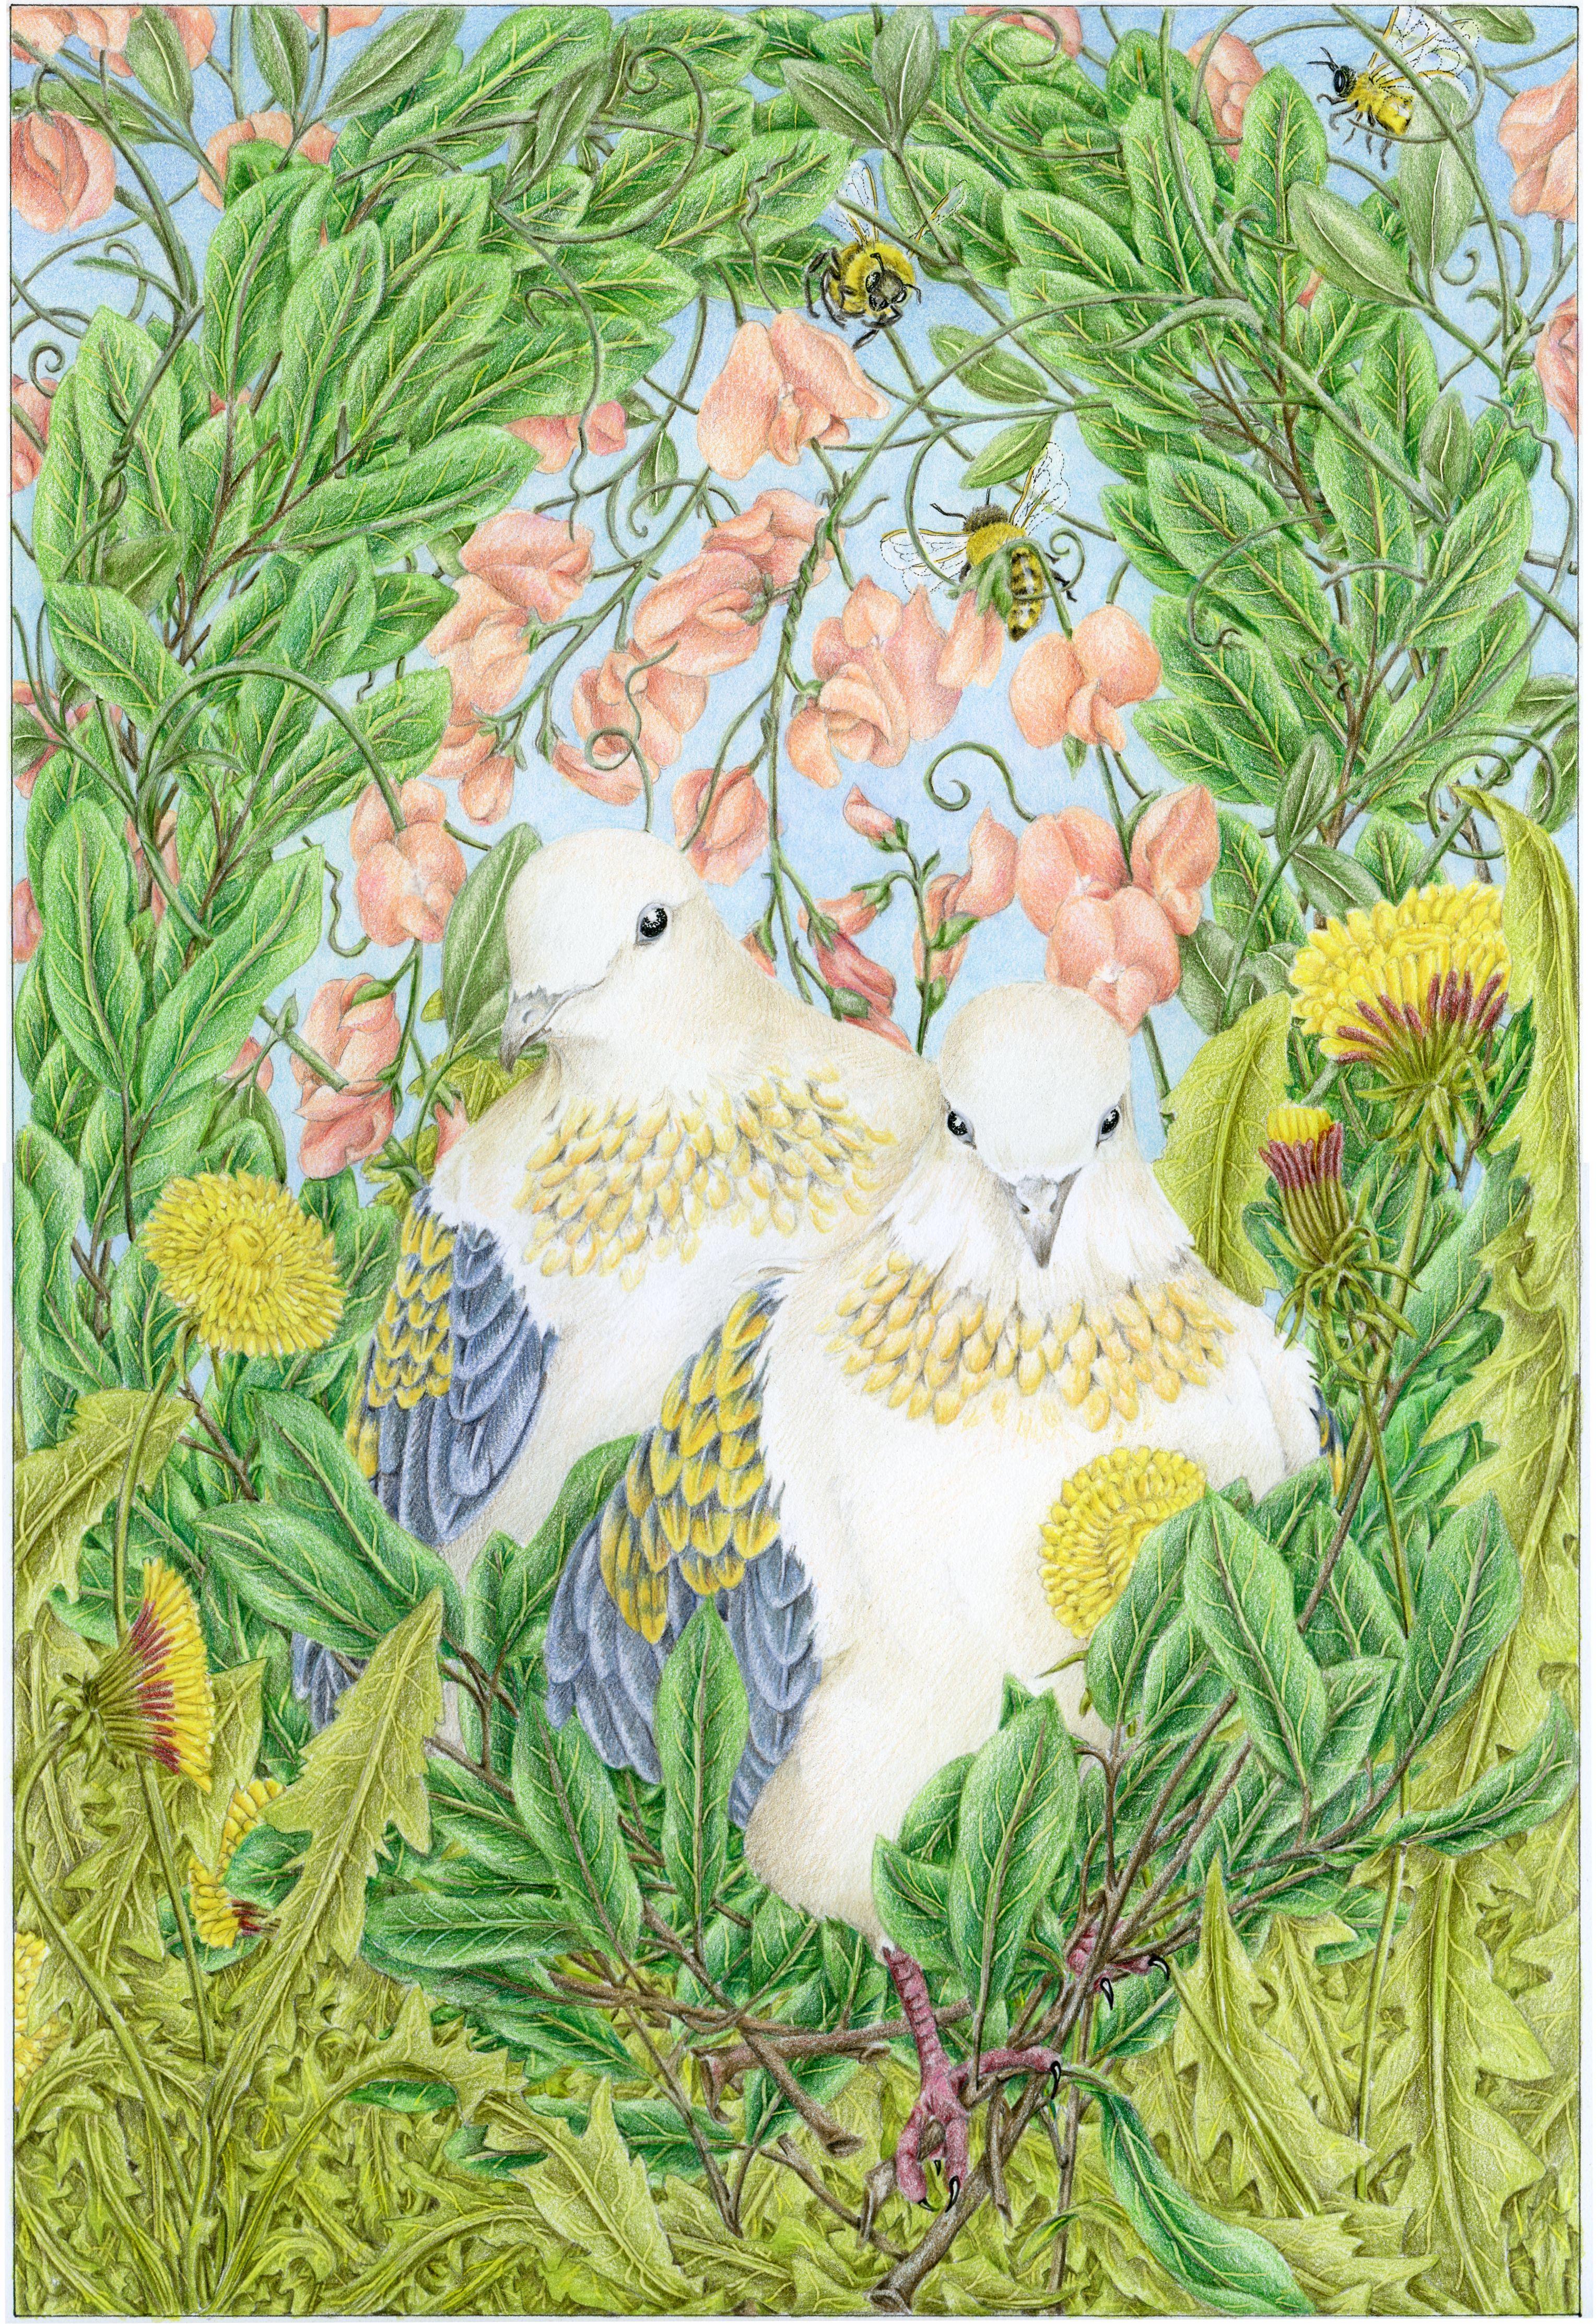 Mary Lee Eggart Animal Art - Gifts of the Spirit: Fortitude